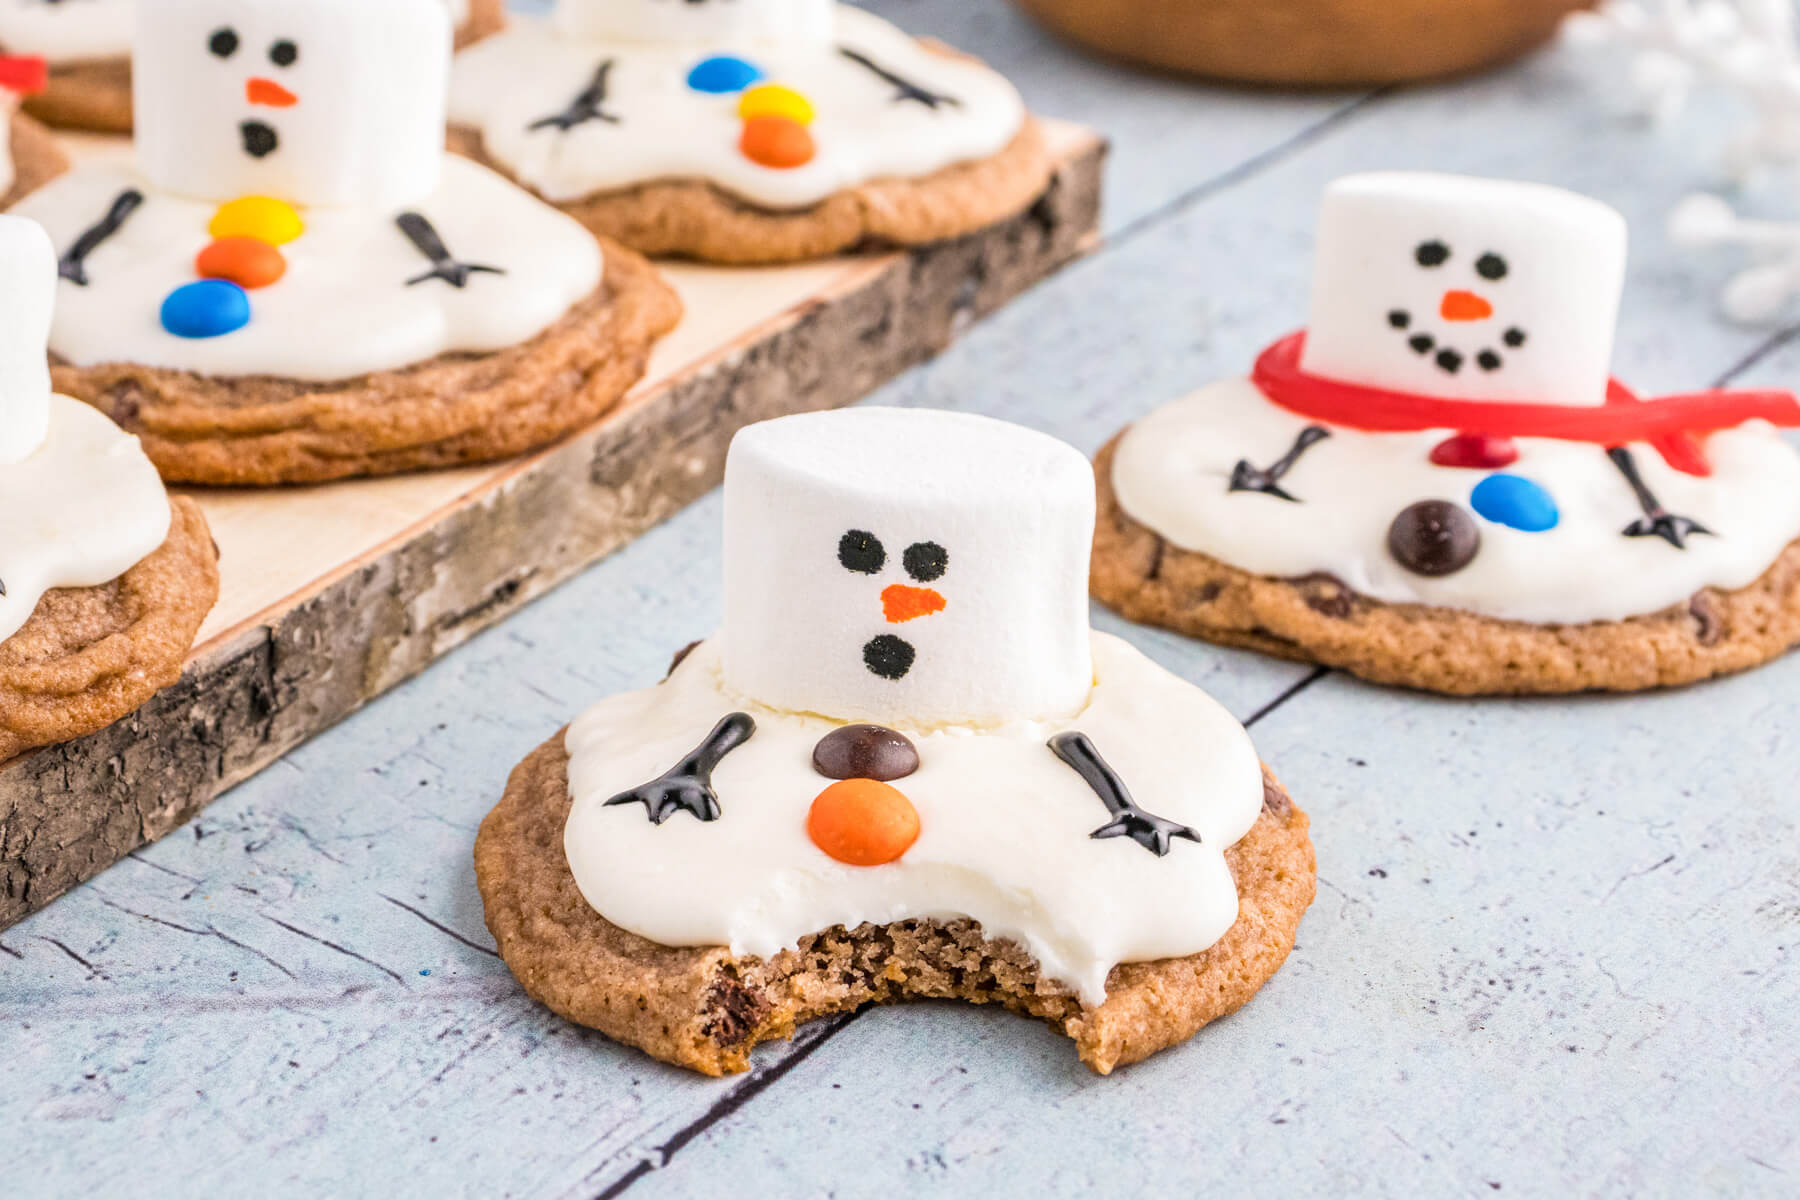 A Melted Snowman cookie decorate with a surprised face with a bite taken out.